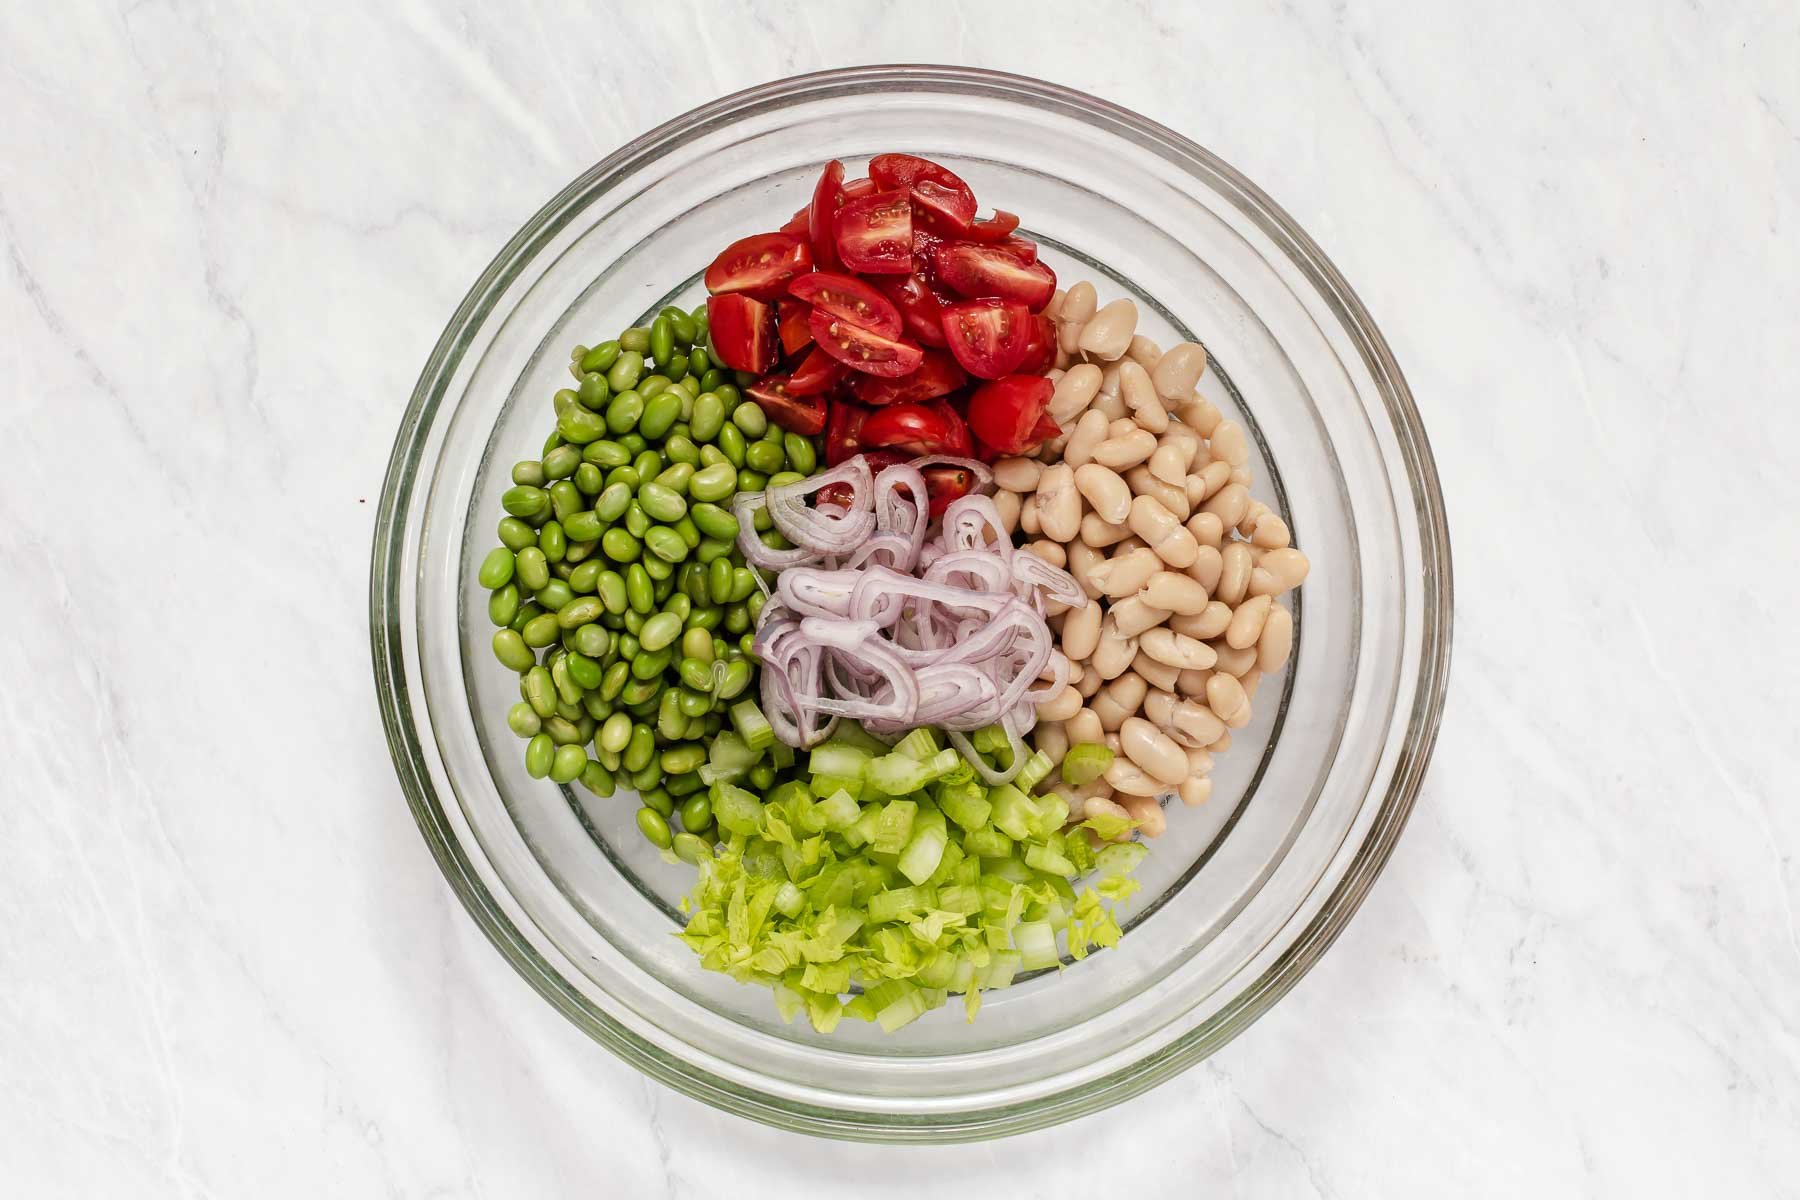 Bowl of edamame, white beans, celery, onions and tomatoes.